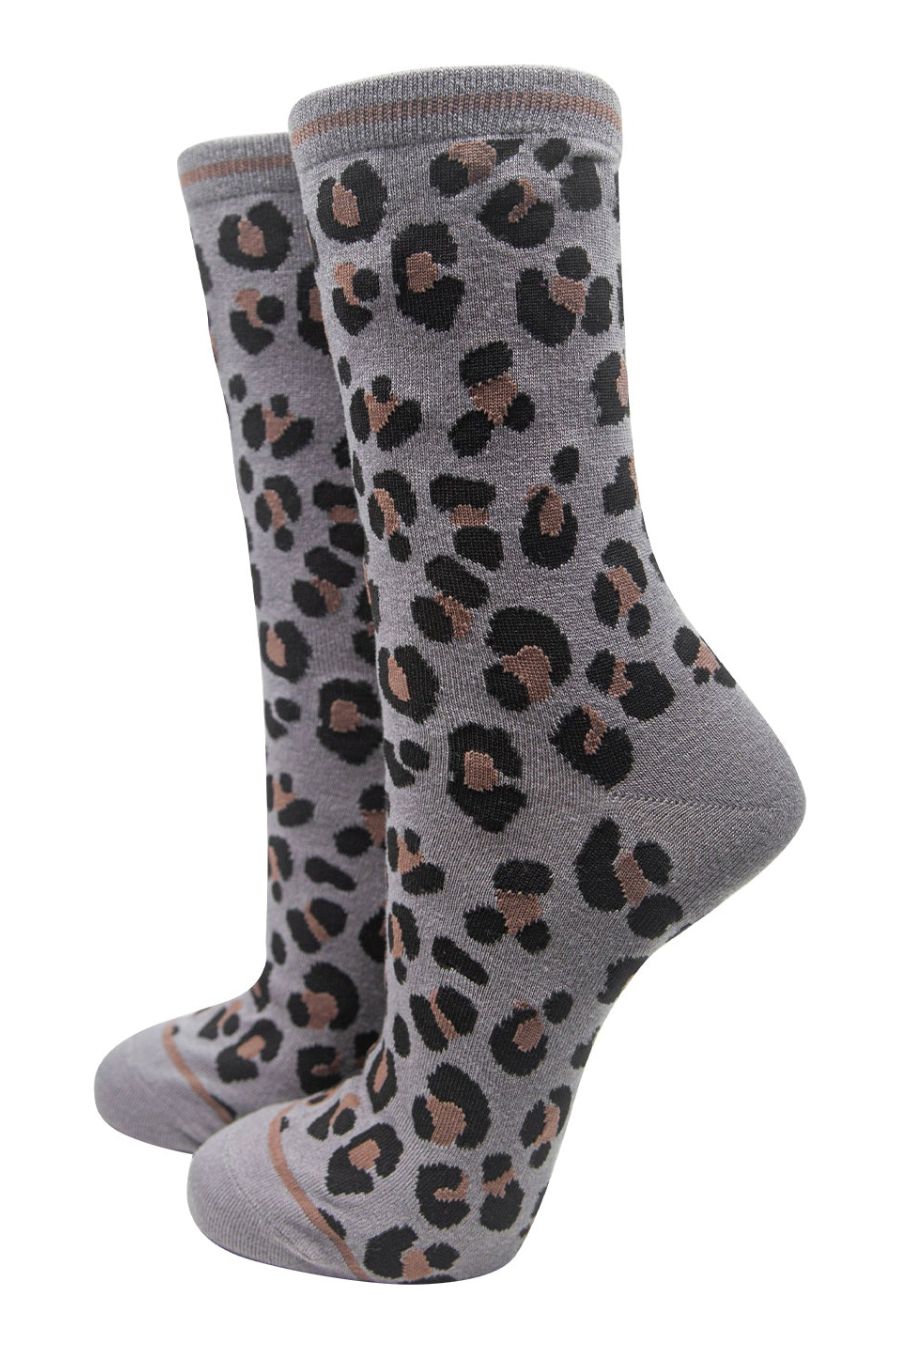 grey bamboo ankle socks with an all over brown and black leopard print